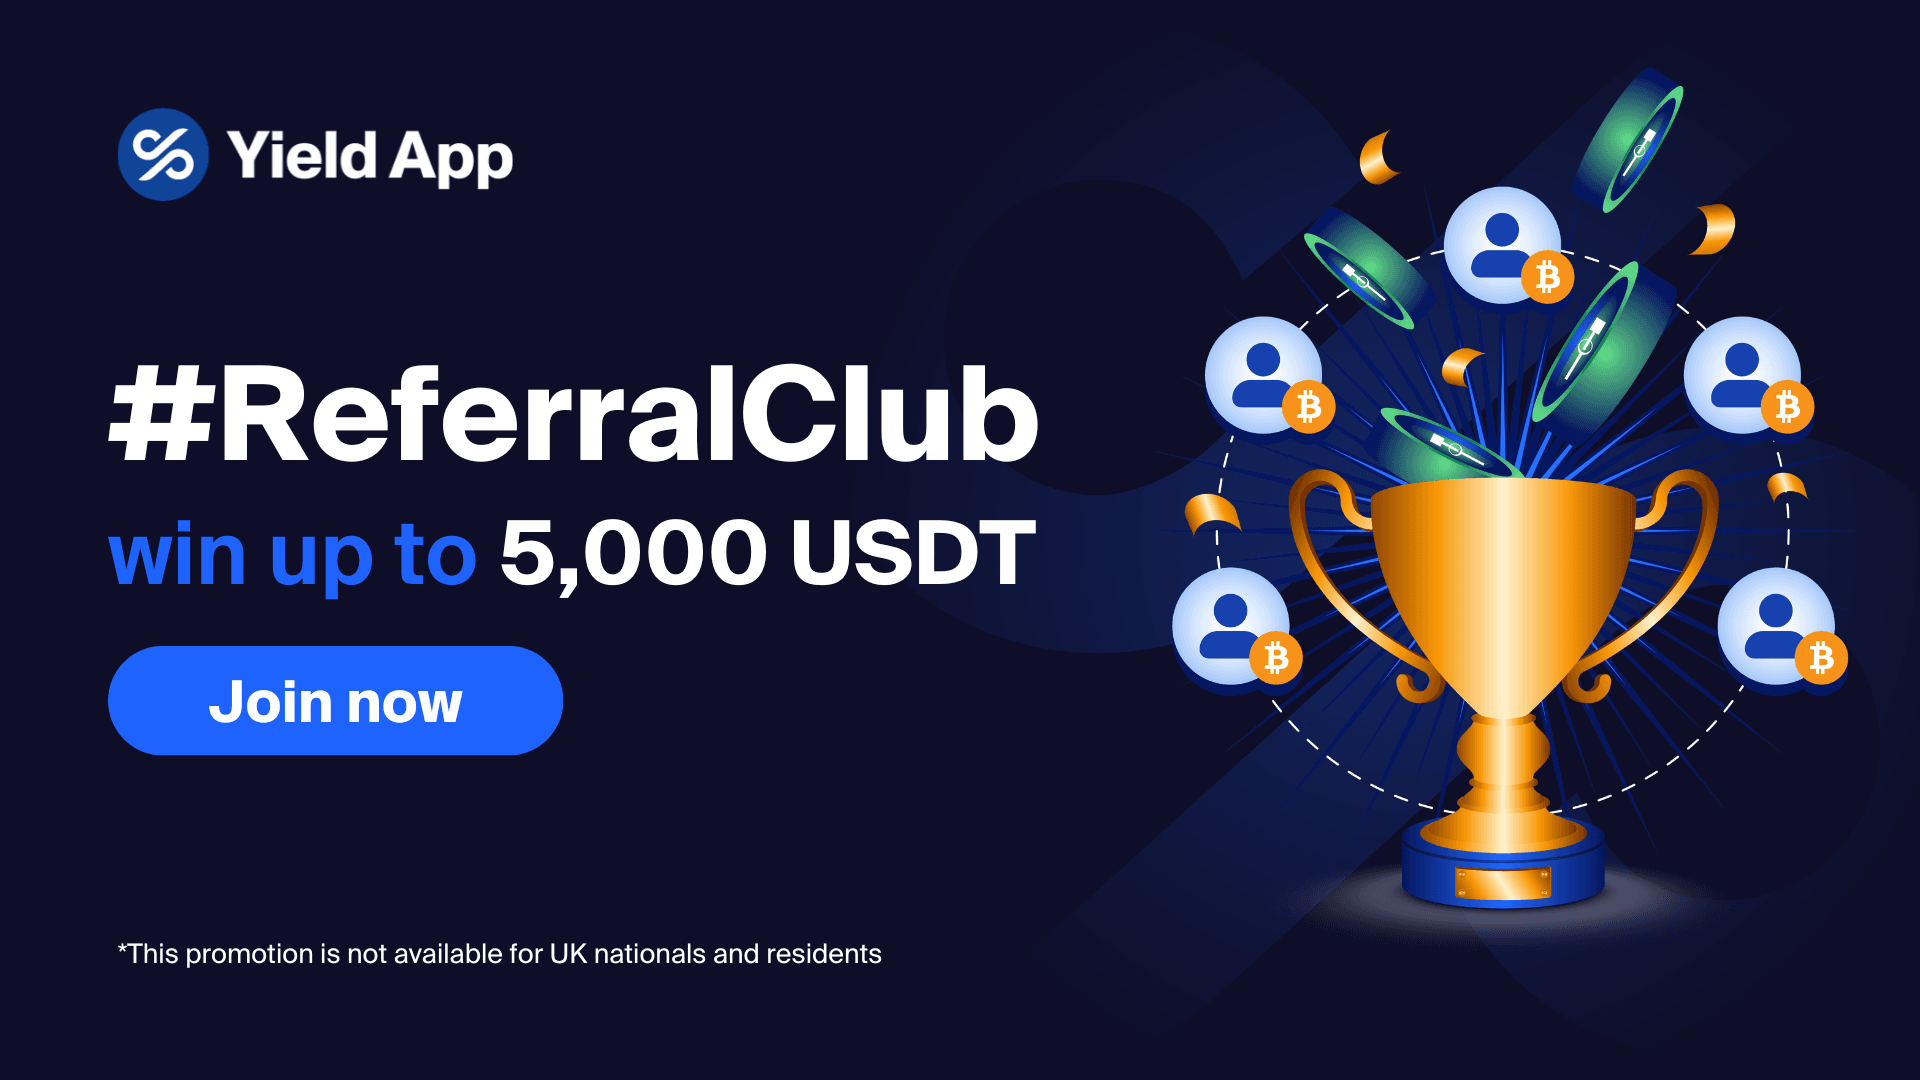 Refer friends, earn rewards, join the club